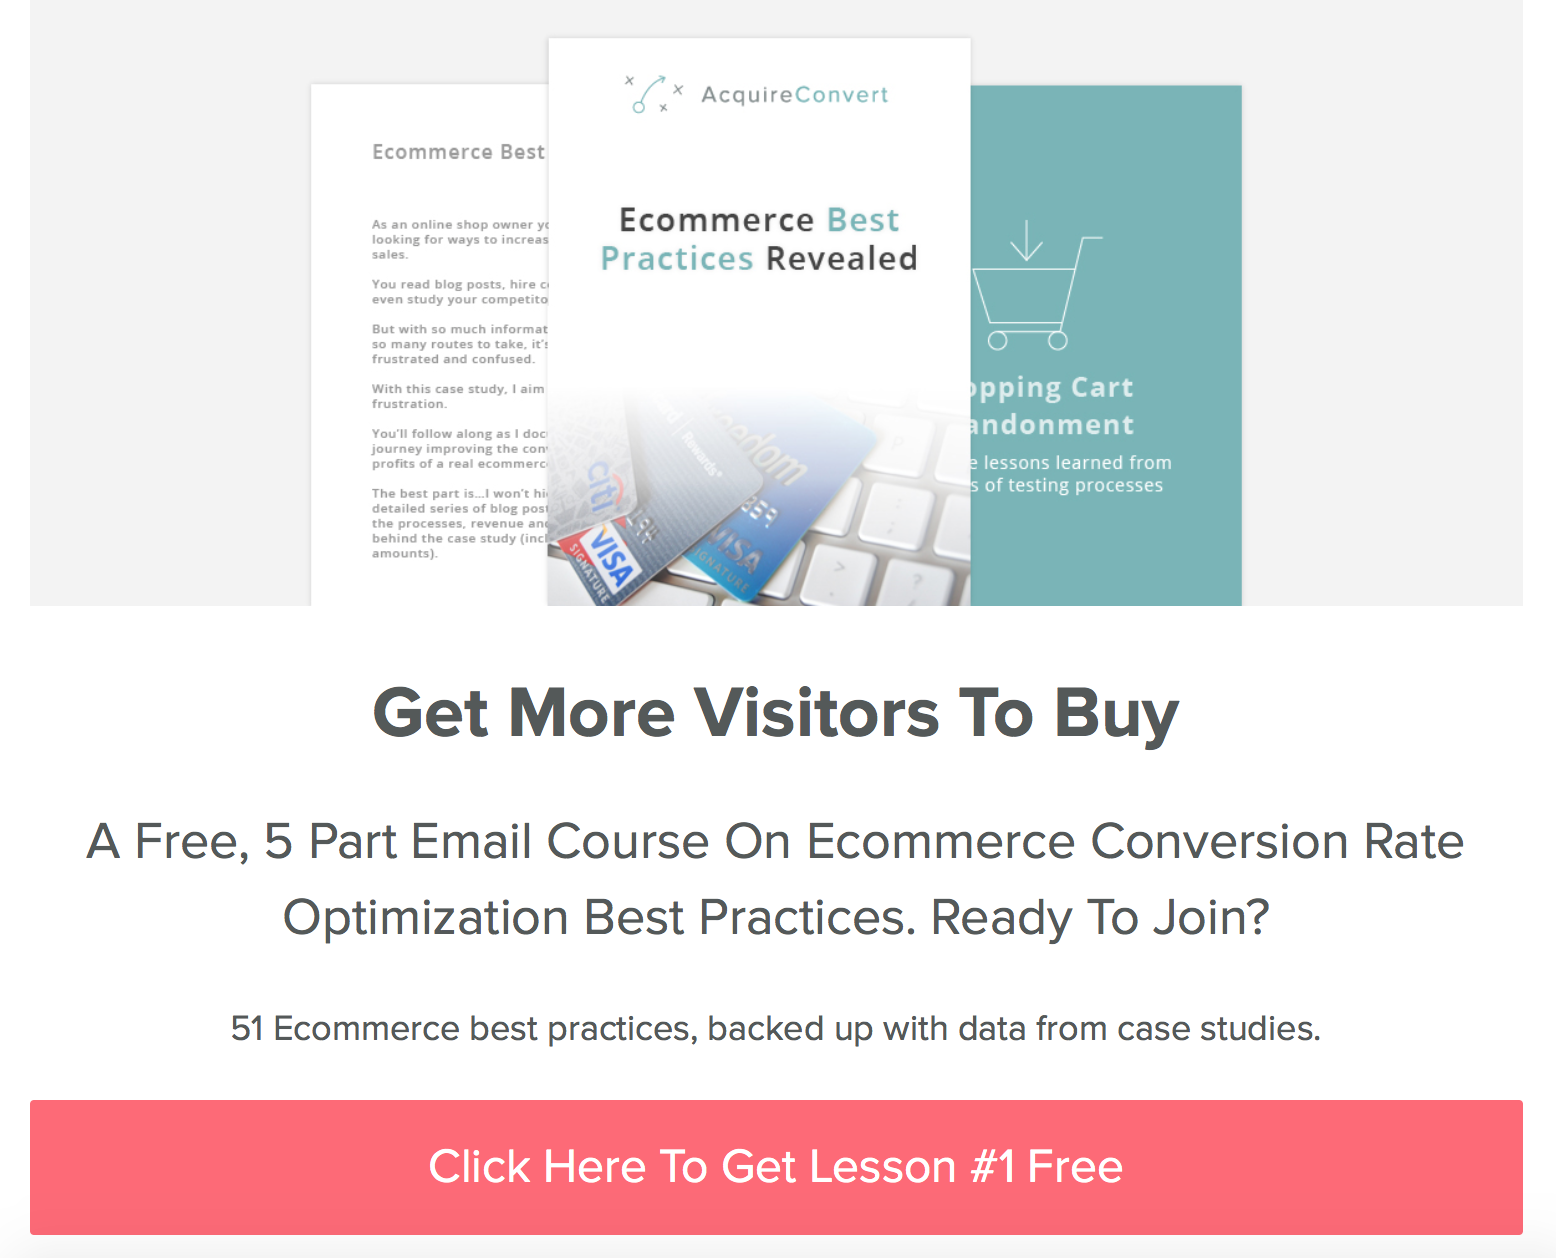 Ecommerce Conversion Rate email course from AcquireConvert